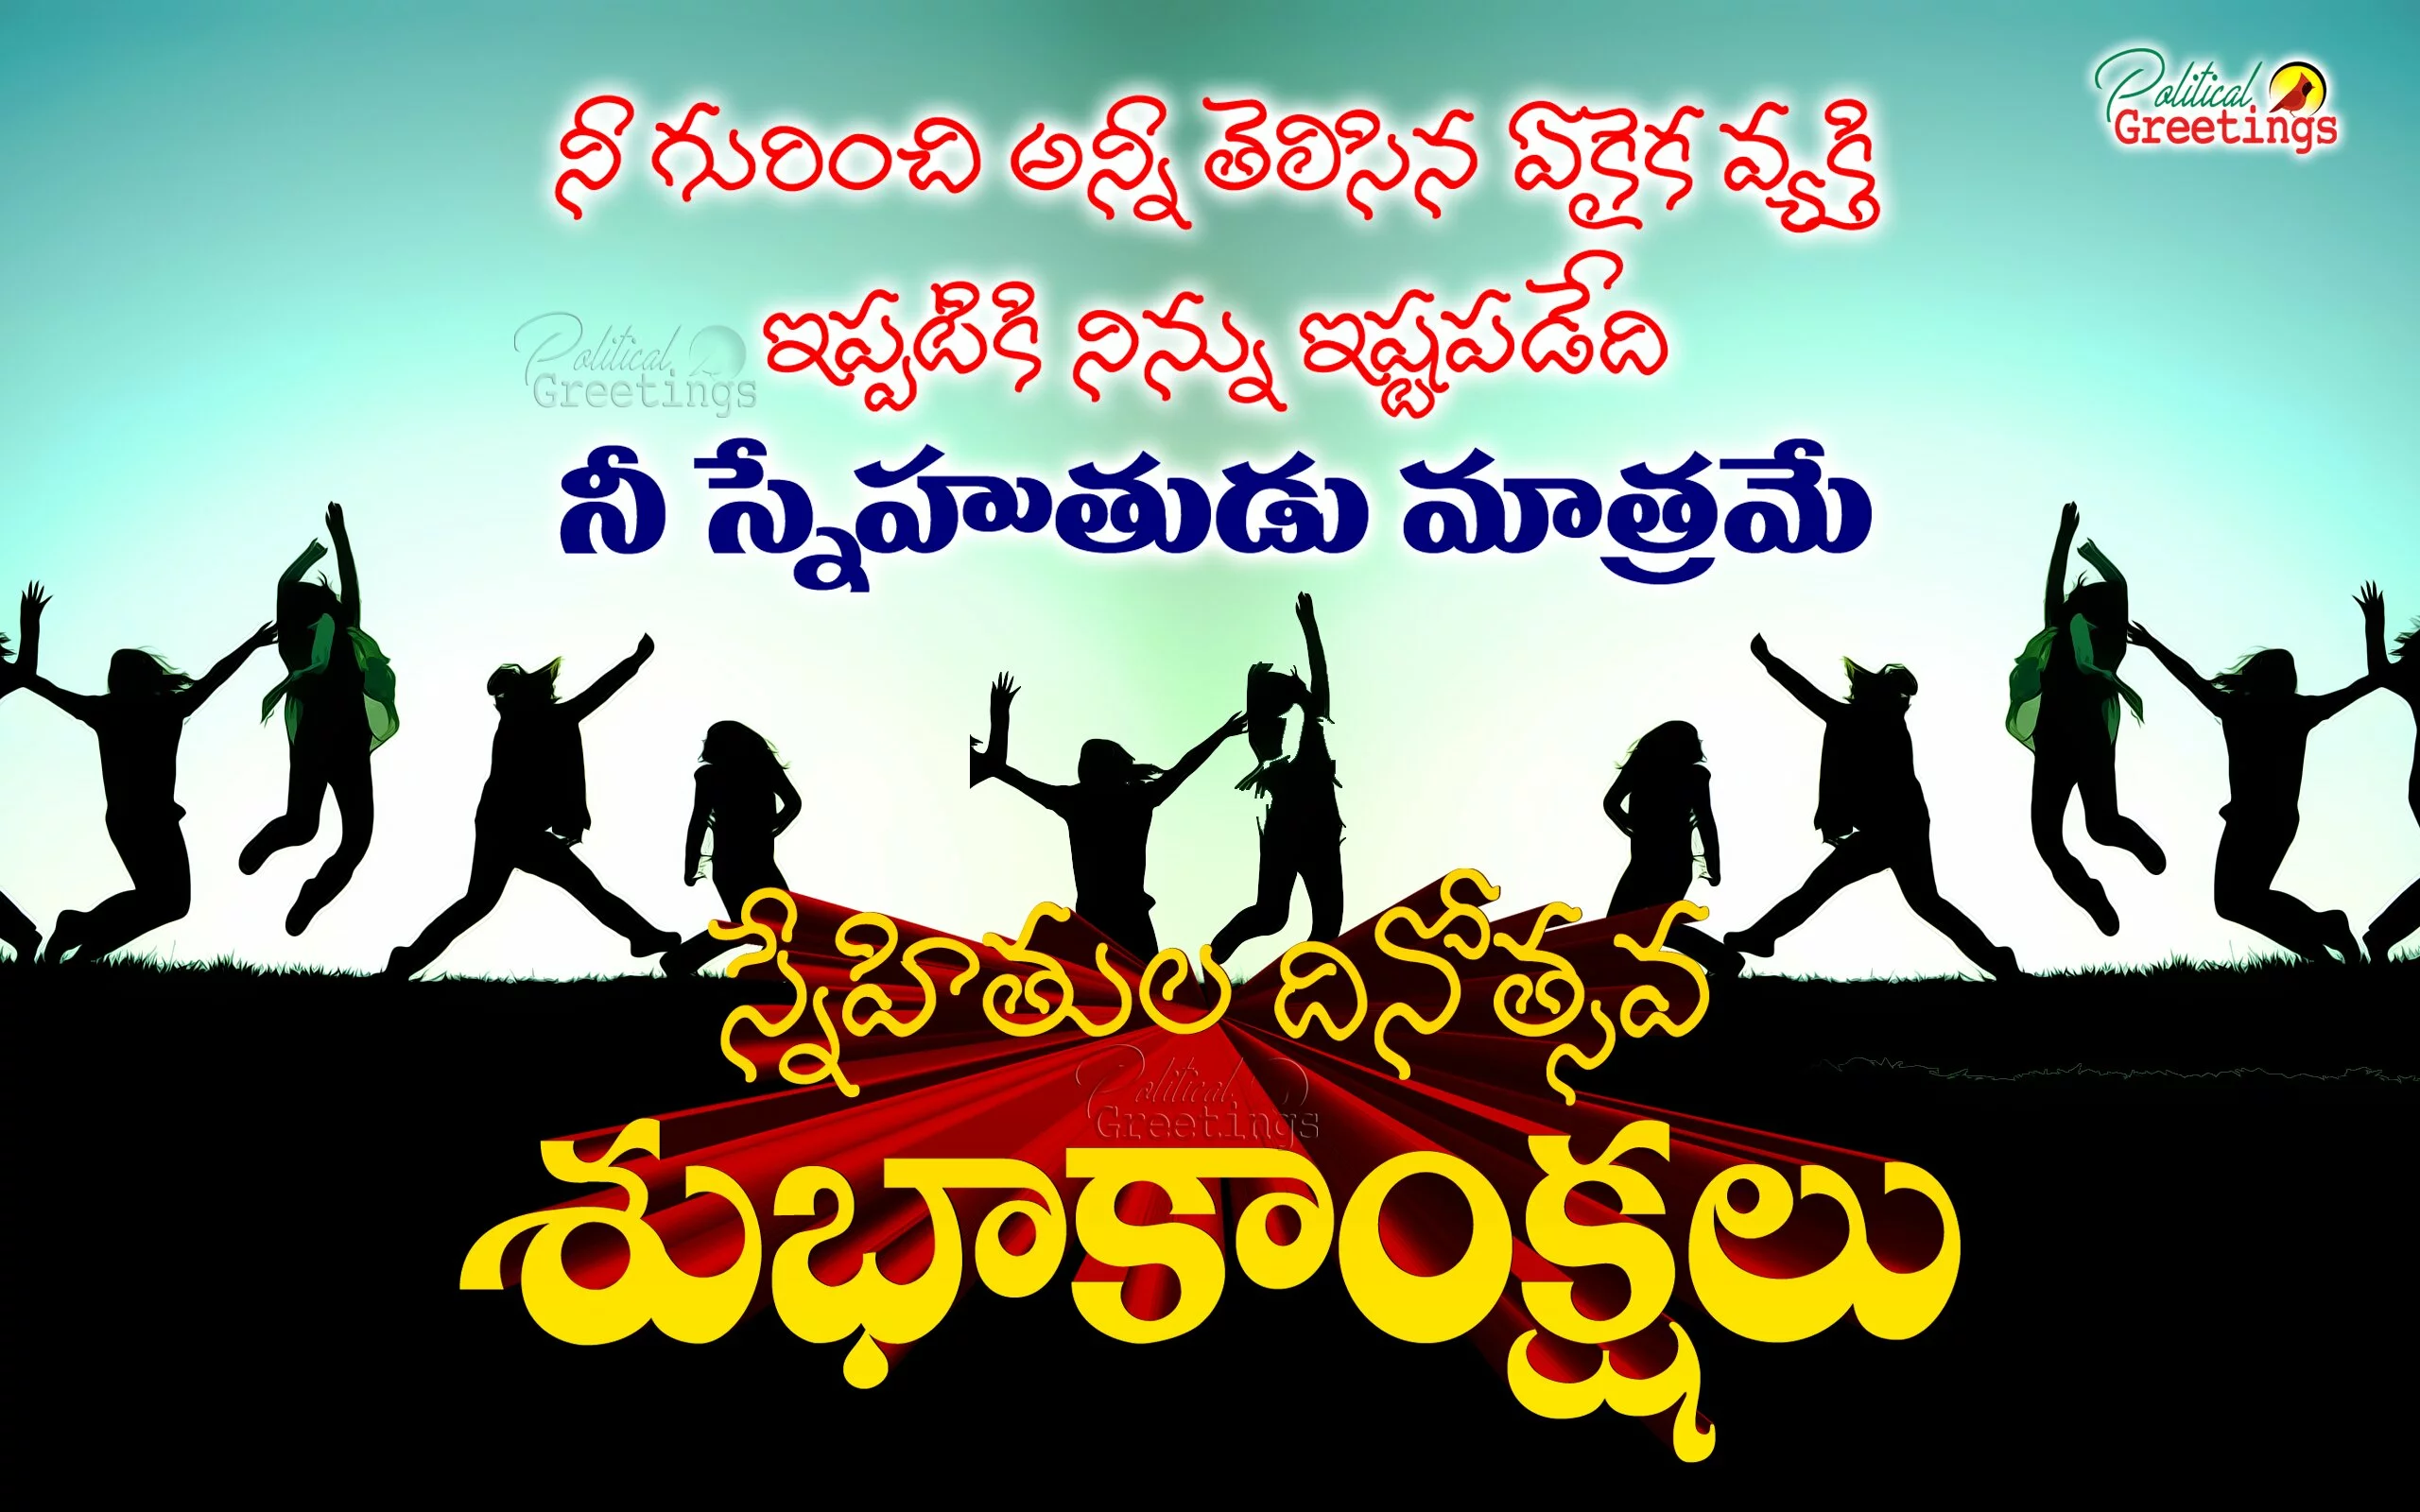 New Telugu Language Friendship Day Greetings for Best friends online